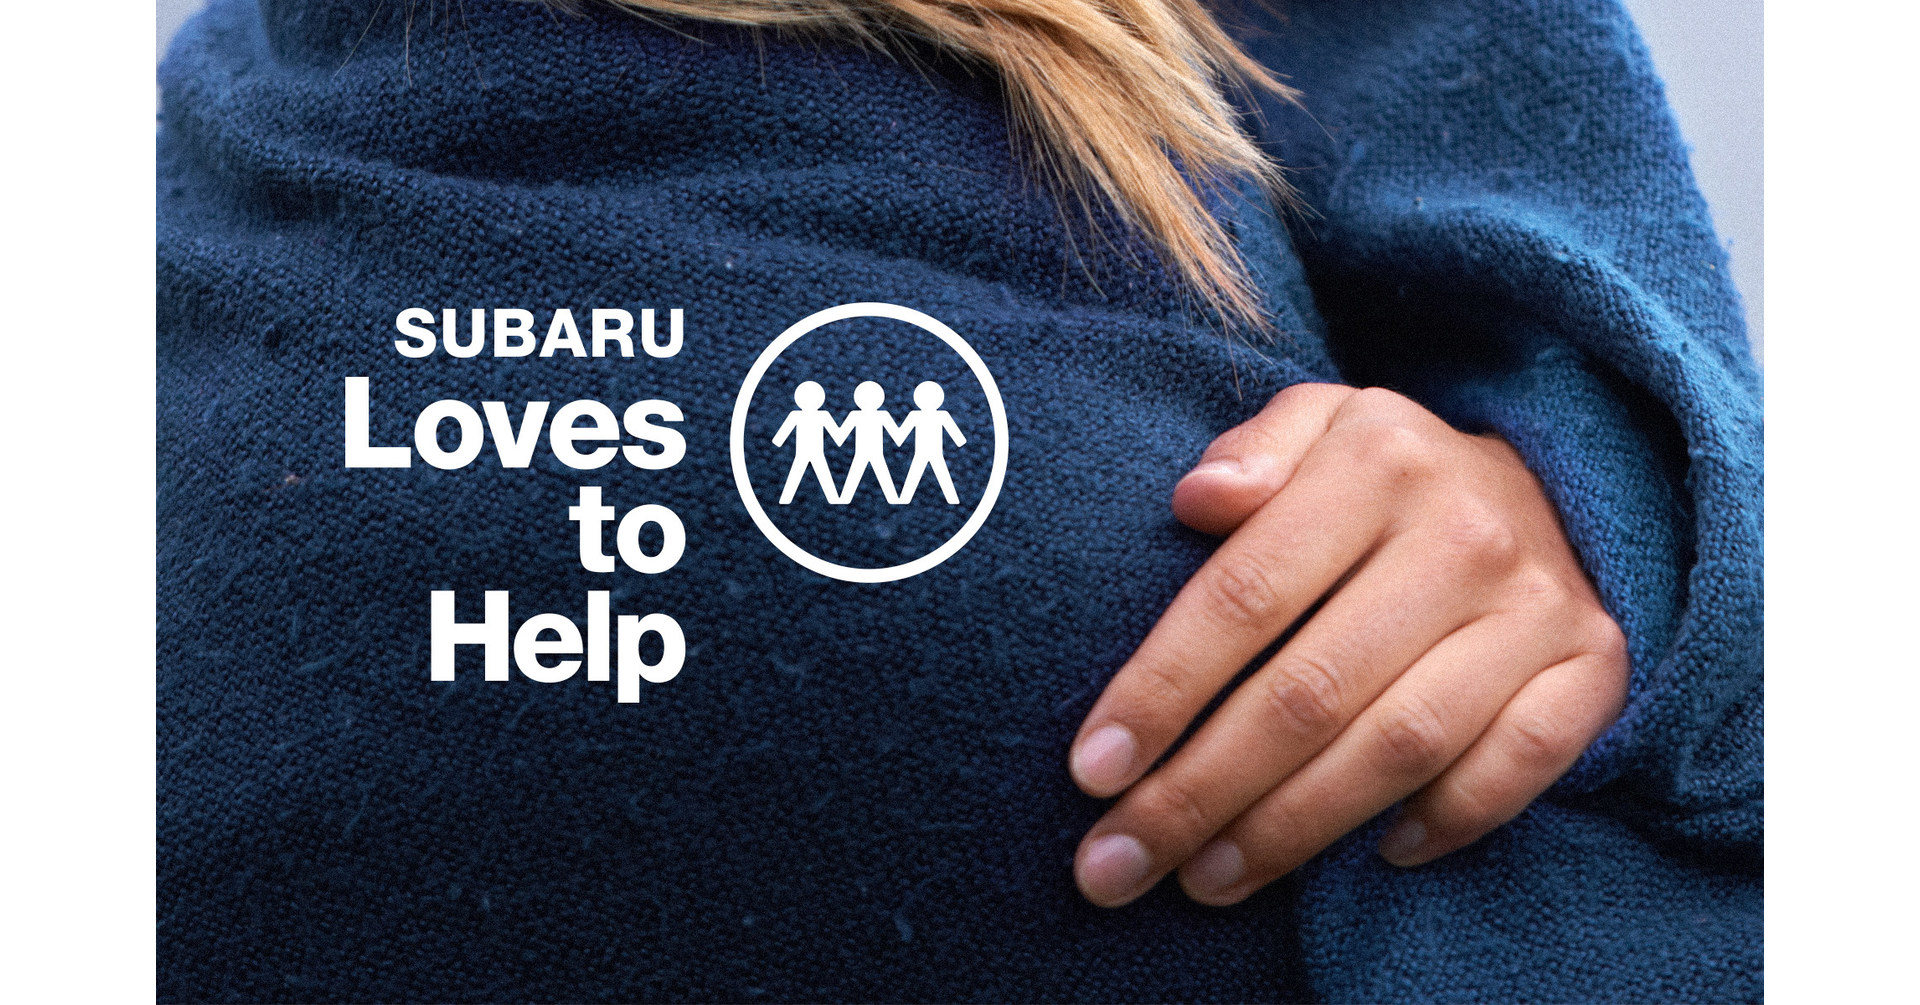 Subaru of America Donates 50,000 Blankets To Homeless Shelters Nationwide